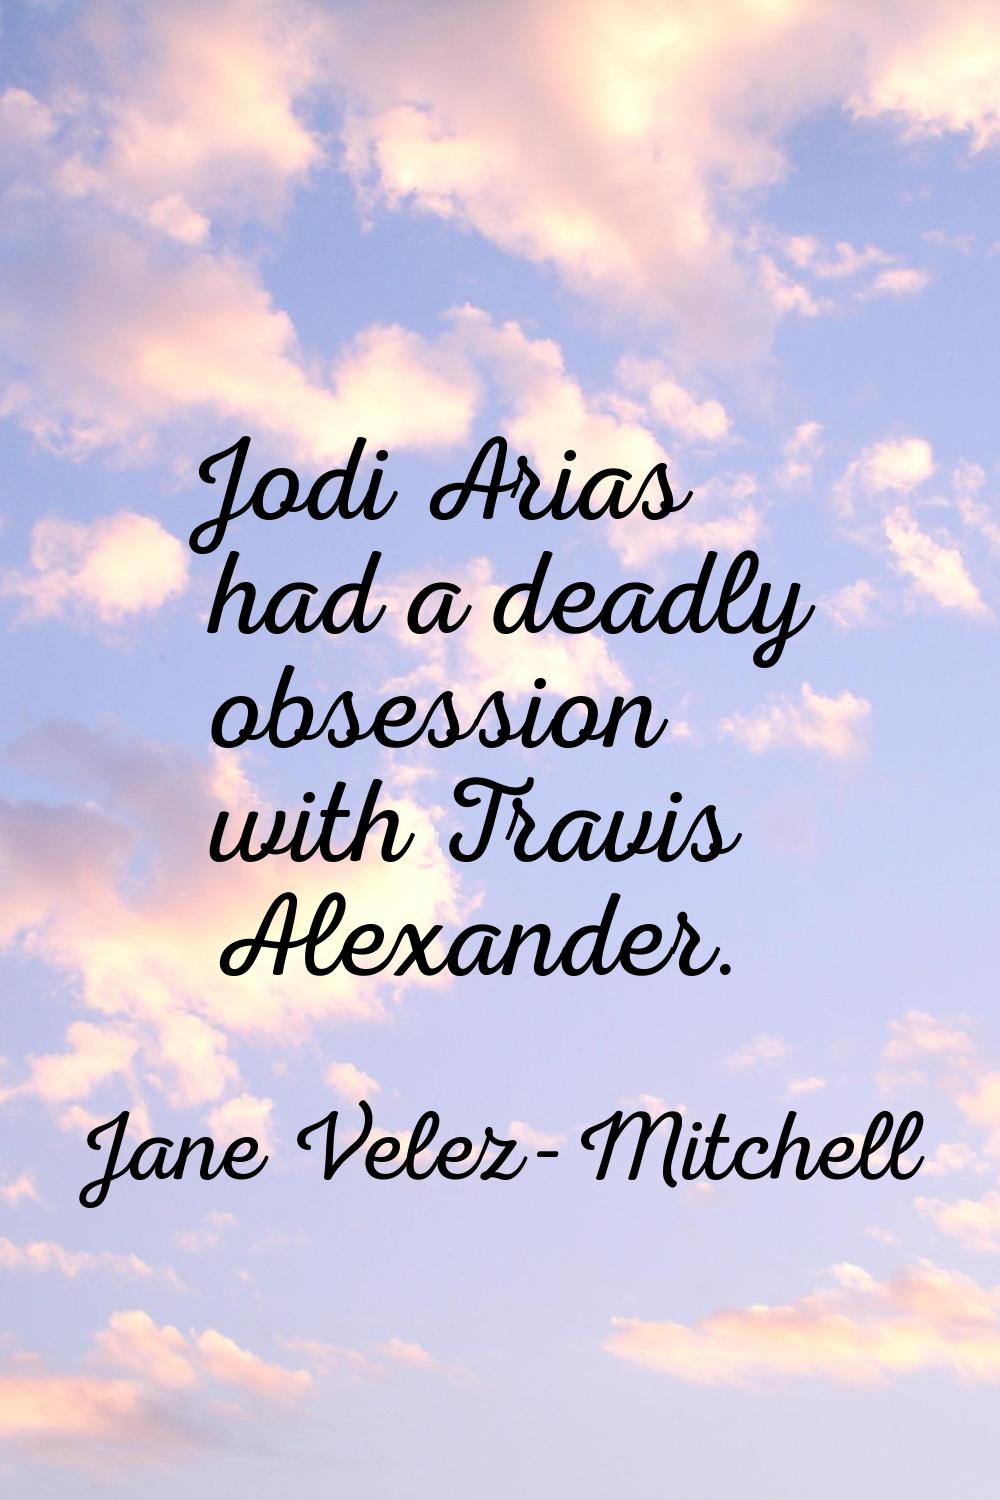 Jodi Arias had a deadly obsession with Travis Alexander.